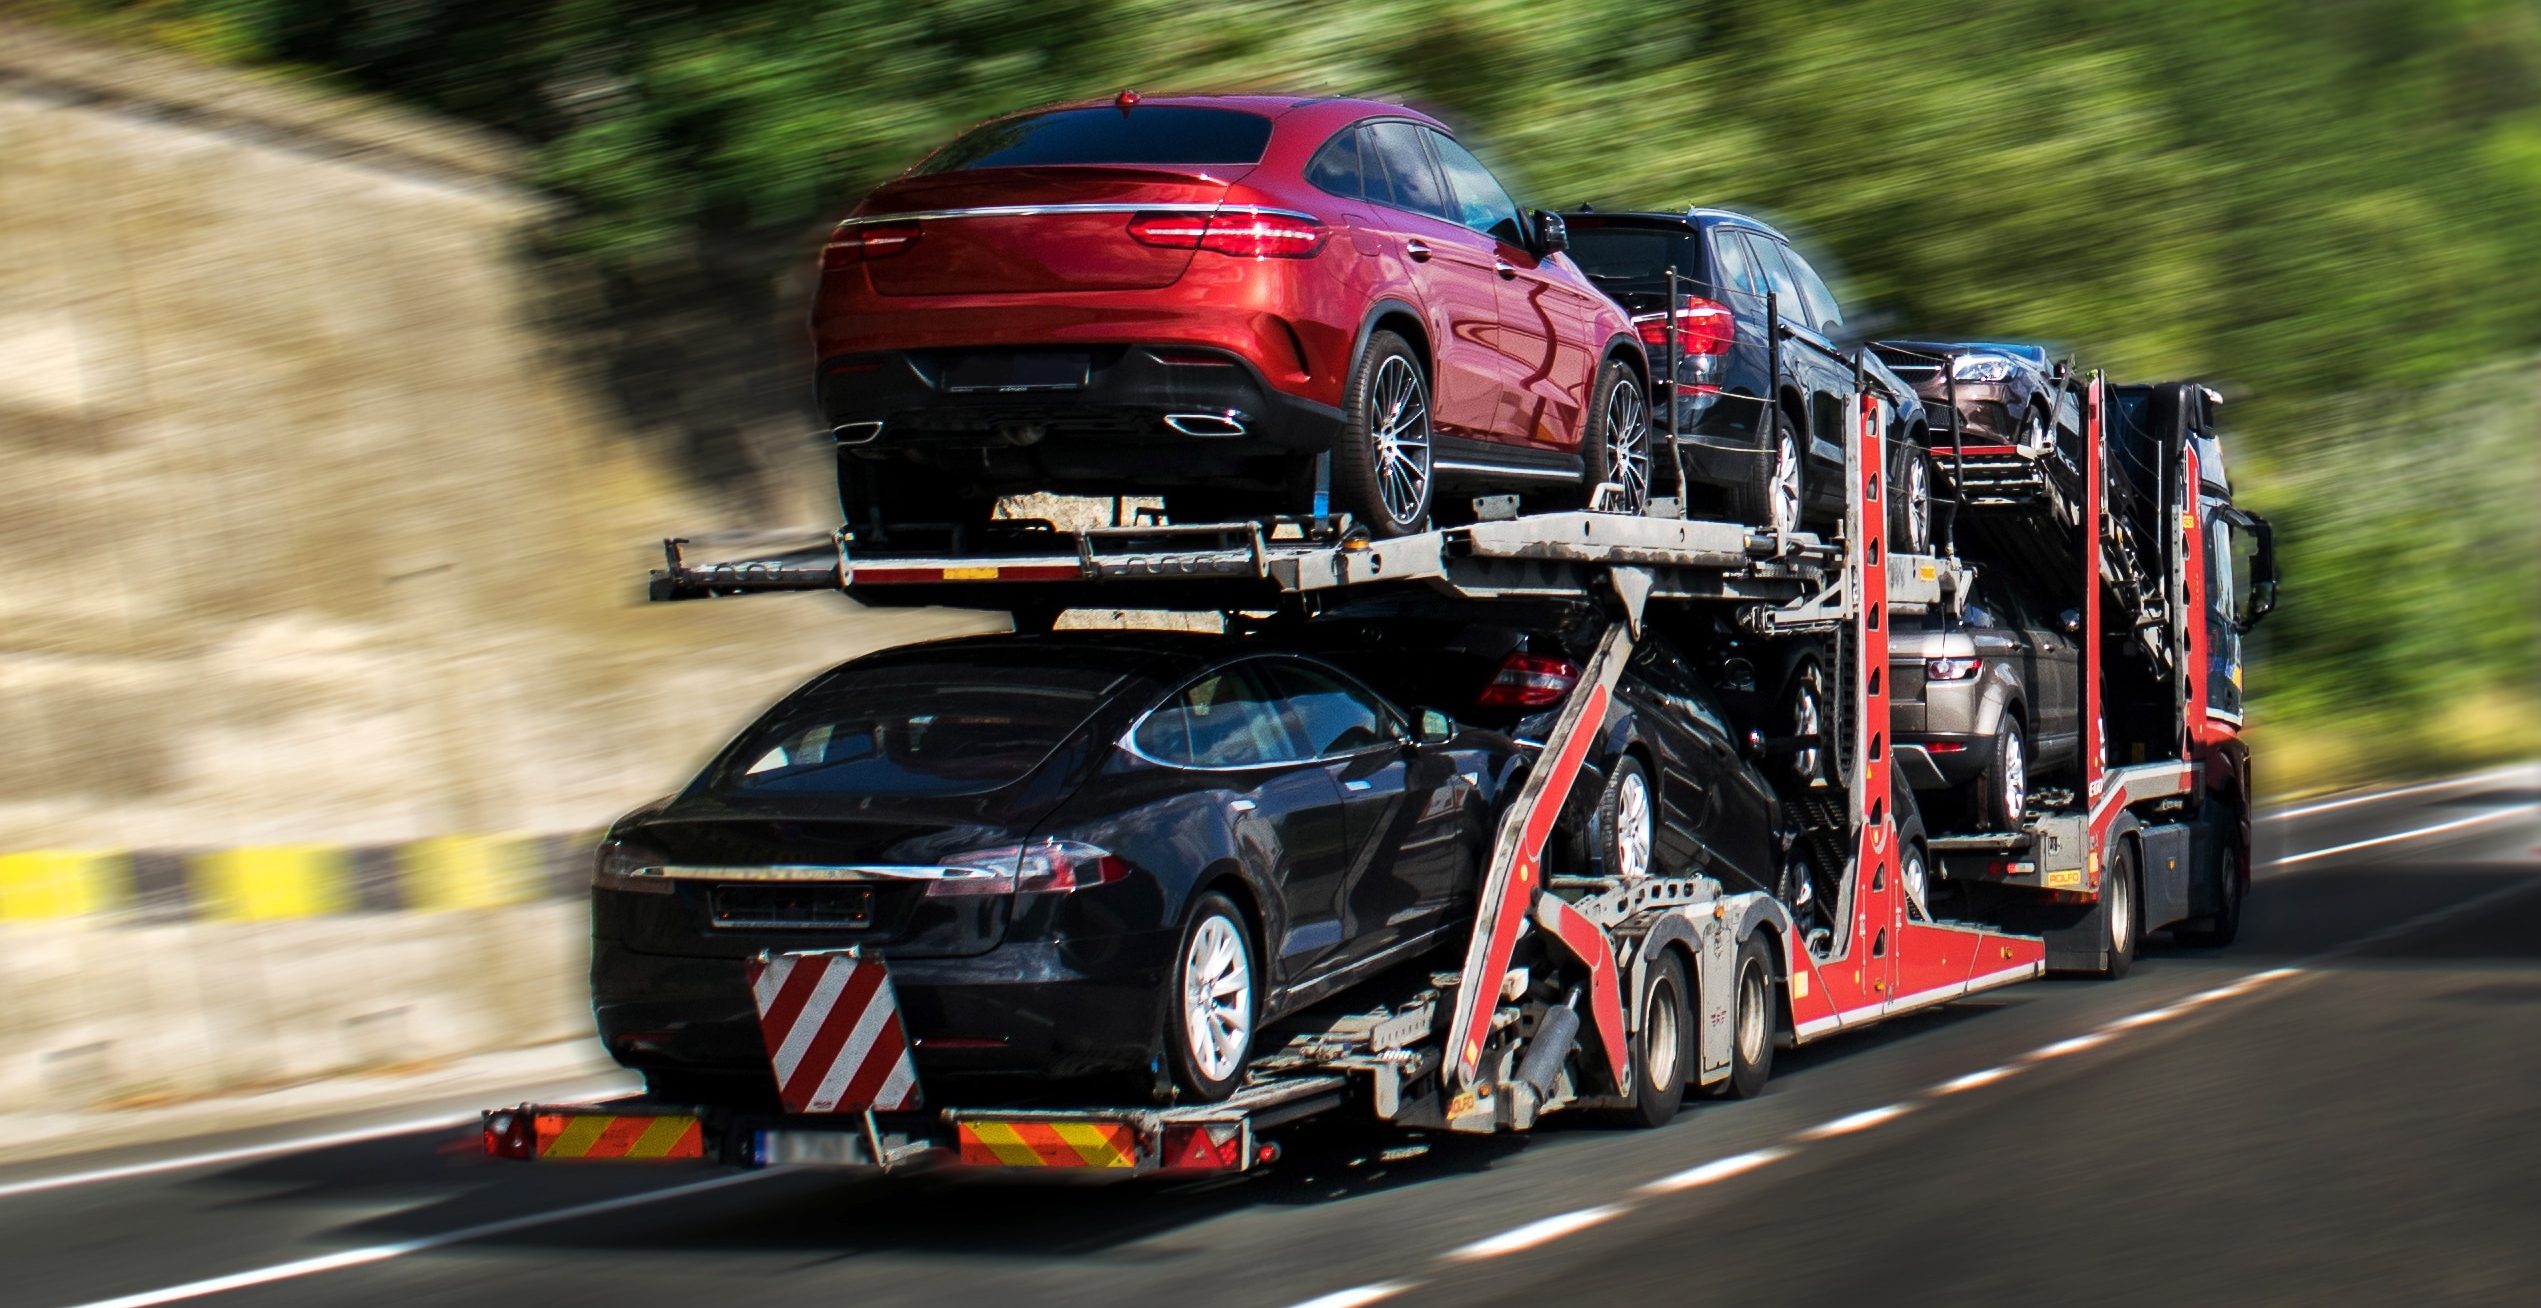 Ready to Ship Your Car to Phoenix?